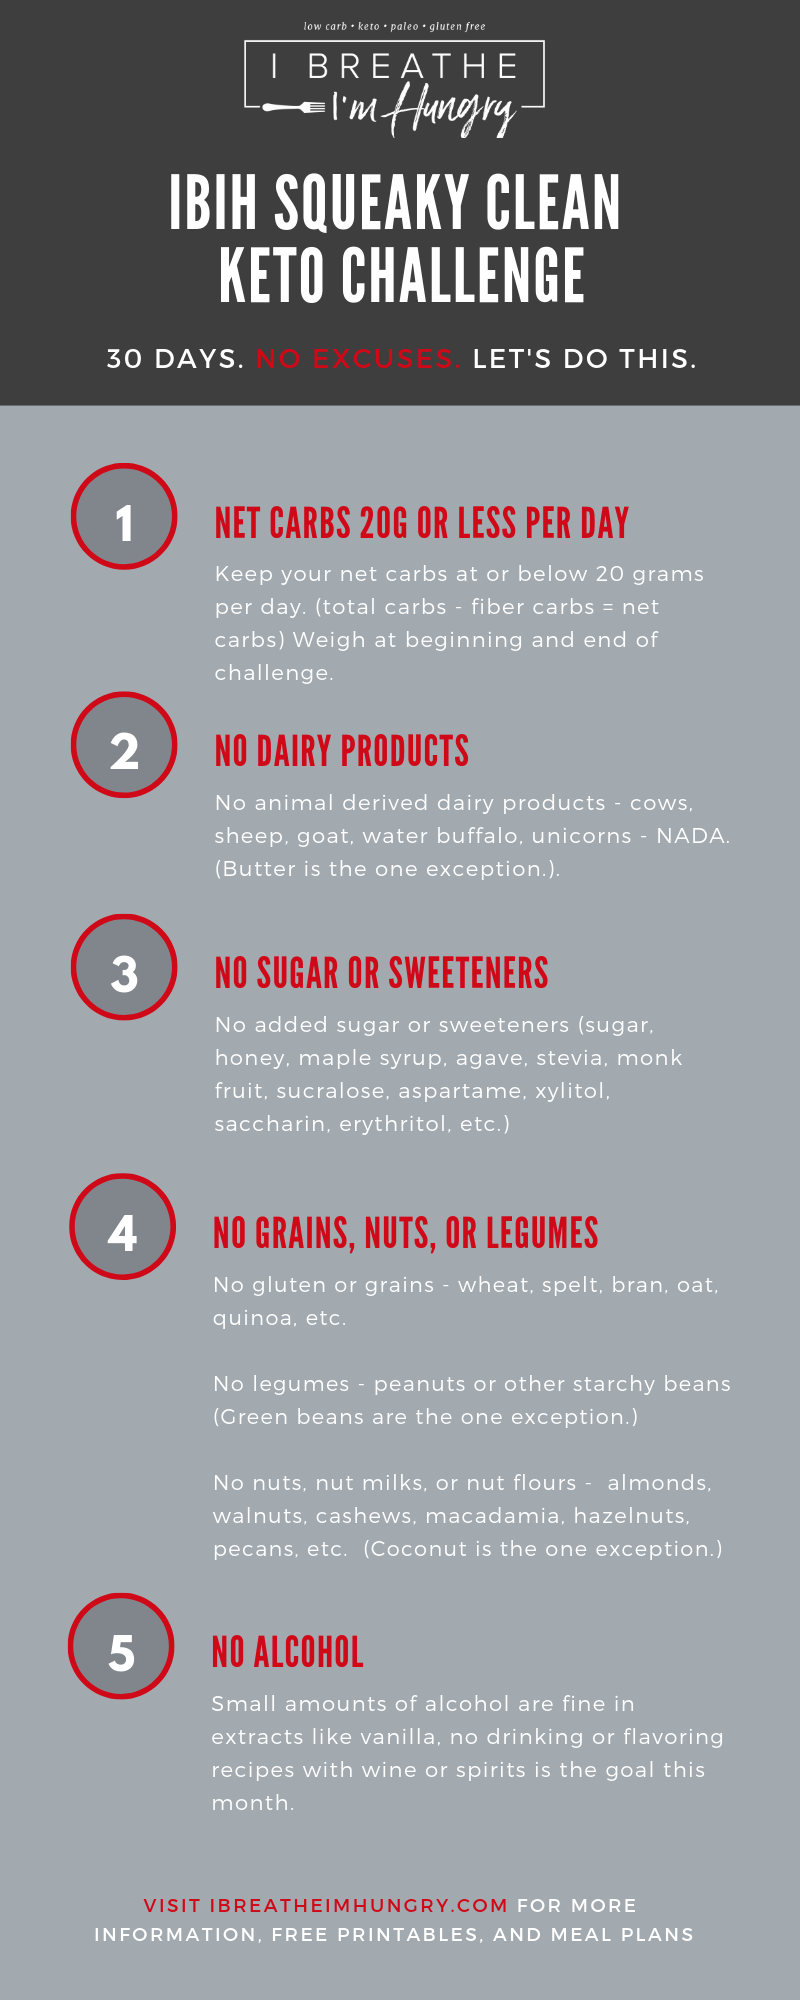 IBIH Squeaky Clean Keto infographic